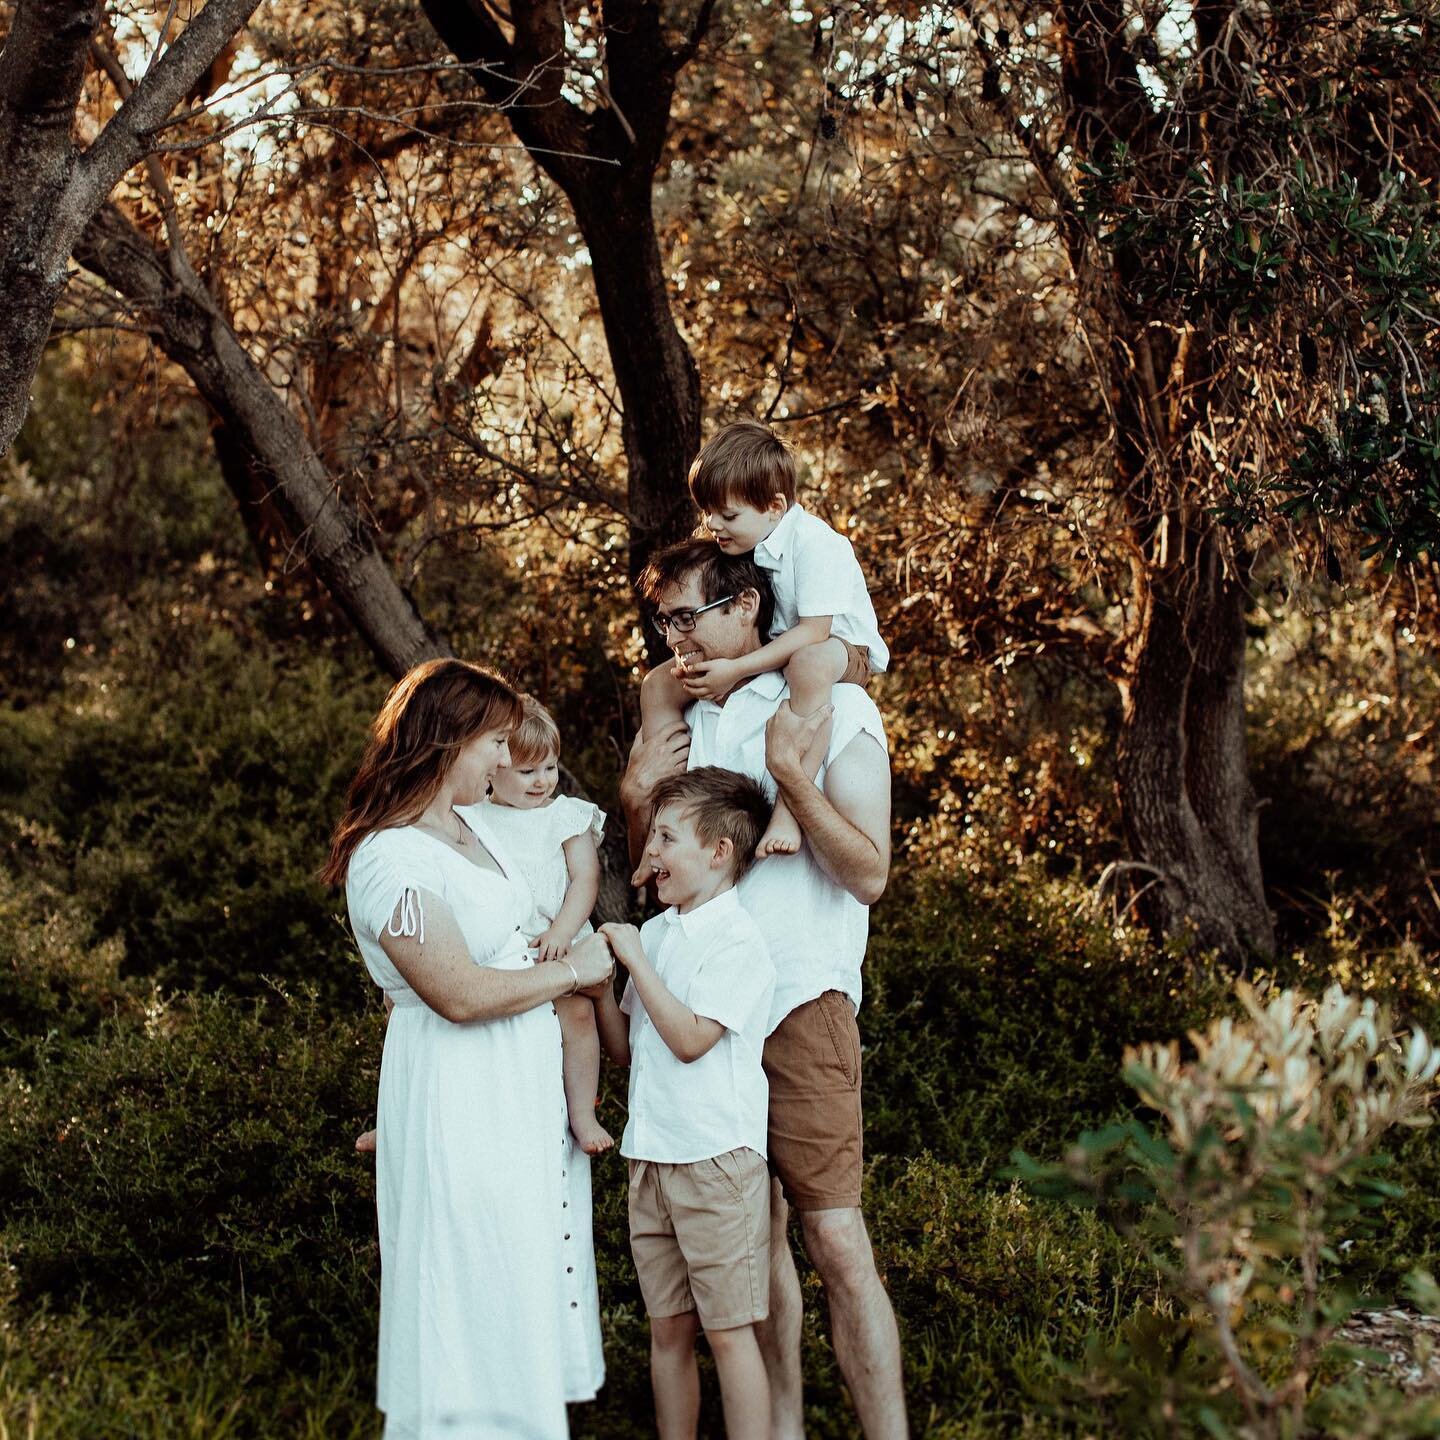 The Petts Family. 

Oh thank you so much for sticking with me for the afternoon on this crazy windy day down in Wollongong! We managed to find a nice sheltered spot from the wind to capture some memories together.

#feelfreefeed #familyphotographersy